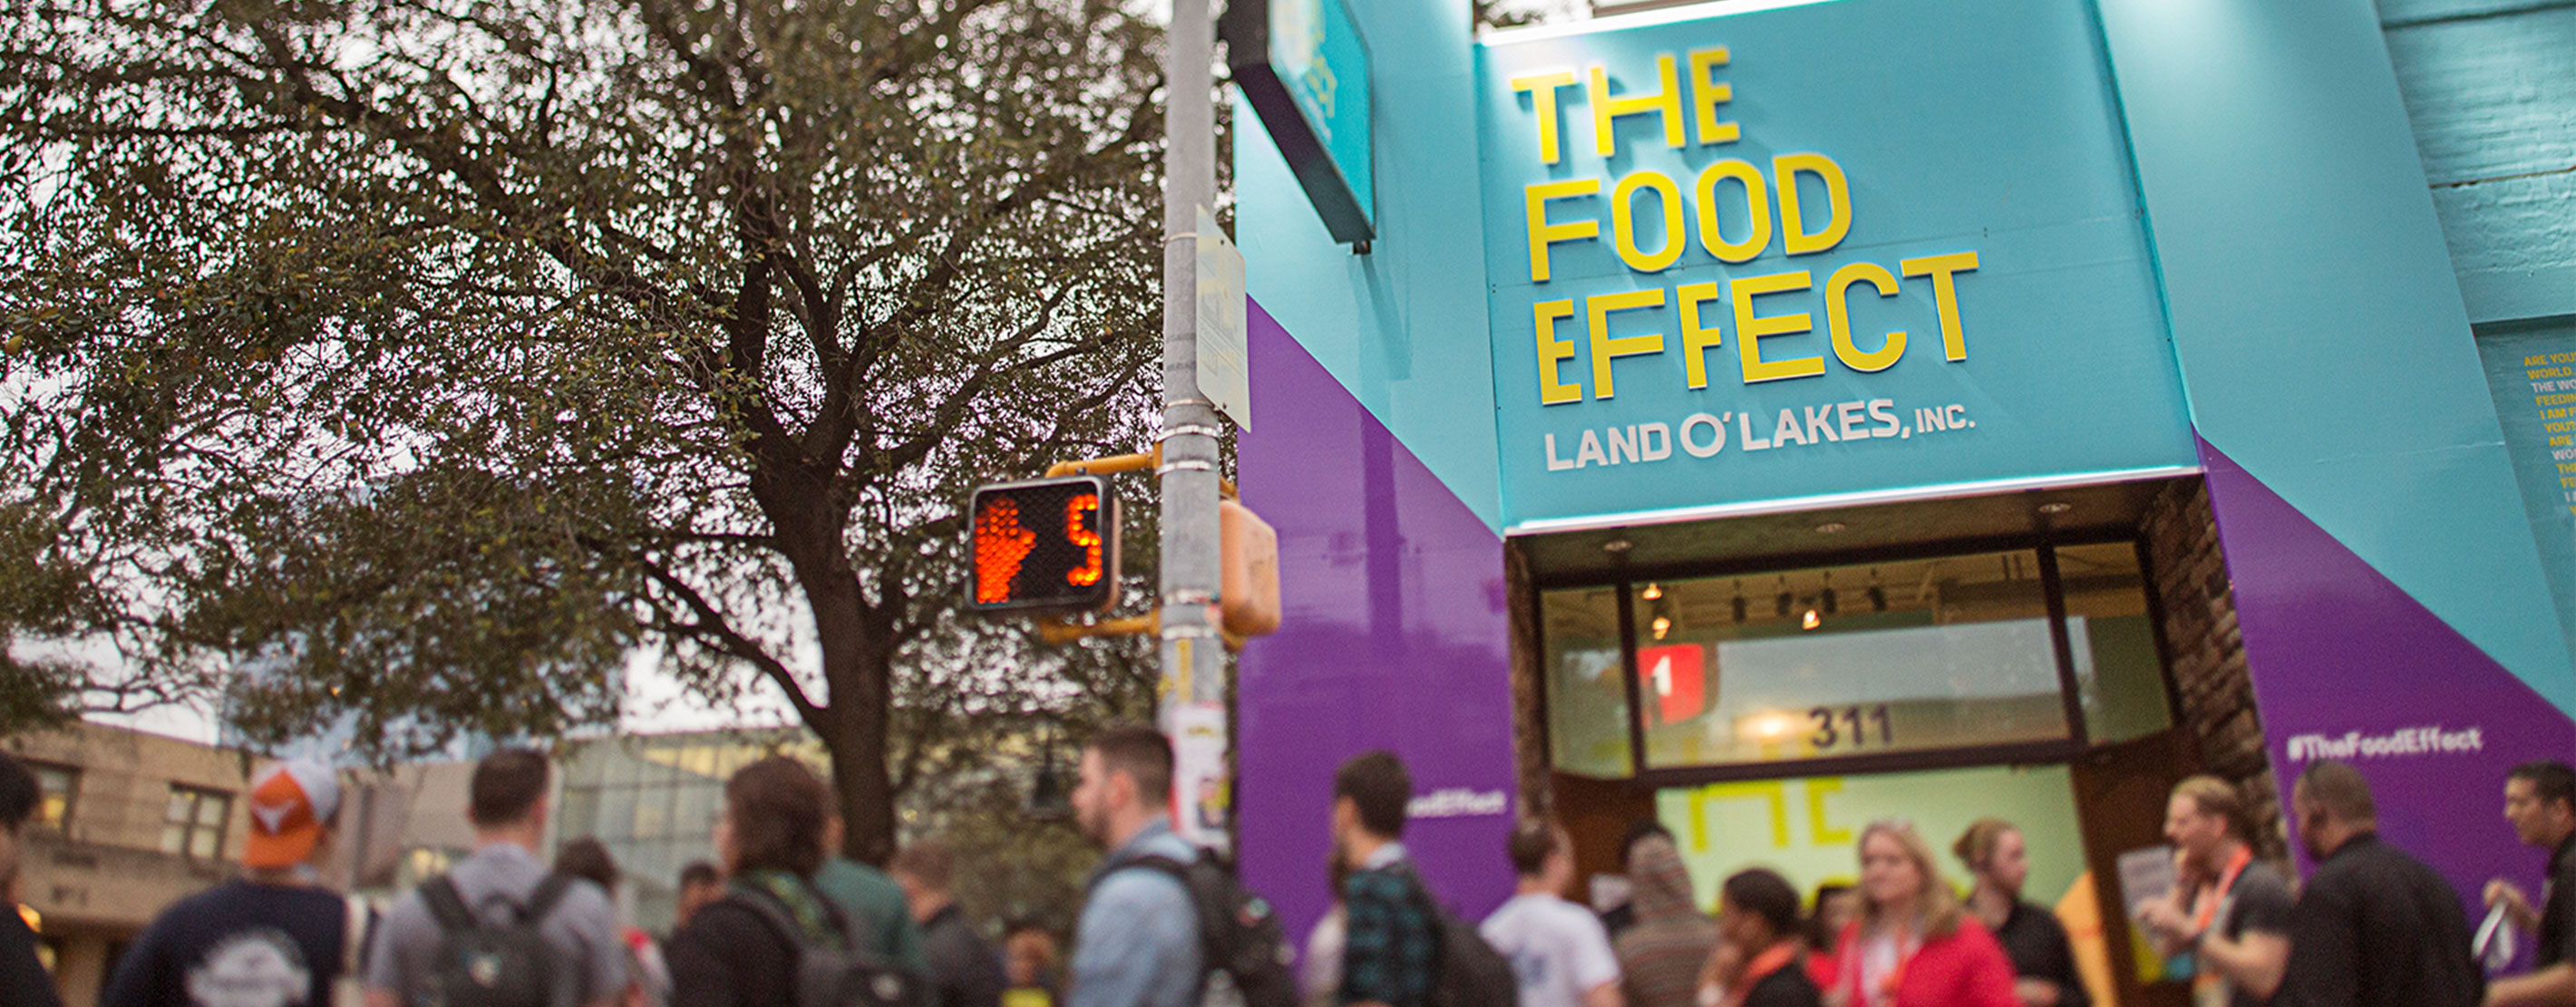 The Food Effect Building Exterior At South By Southwest in Austin, Texas